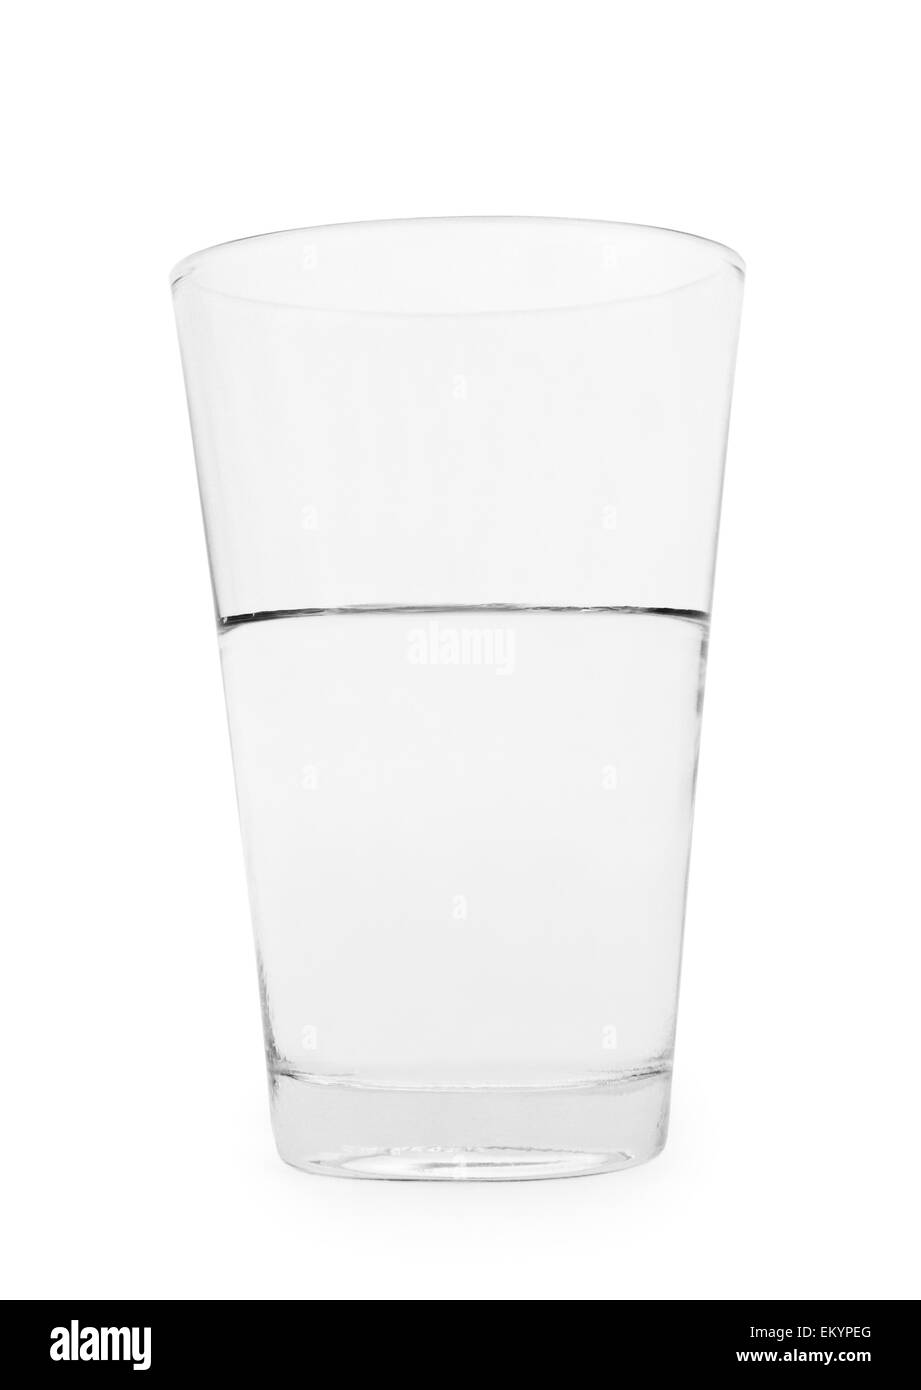 Half full glass water Black and White Stock Photos & Images - Alamy